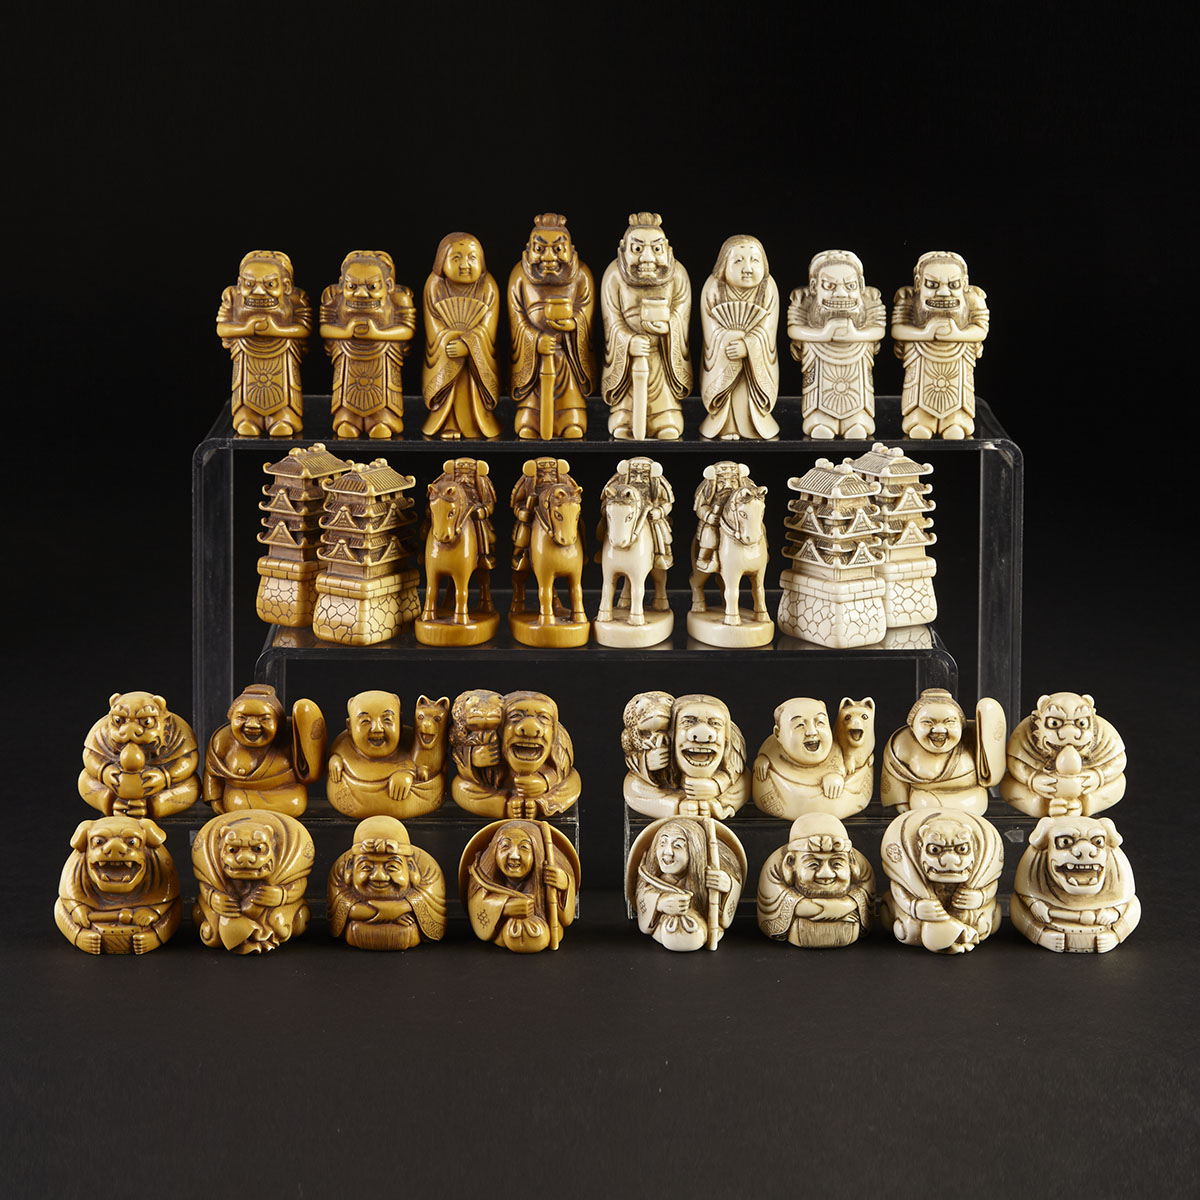 Japanese Carved Ivory Netsuke Type Figural Chess Set signed Tomomitsu, 19th or early 20th century